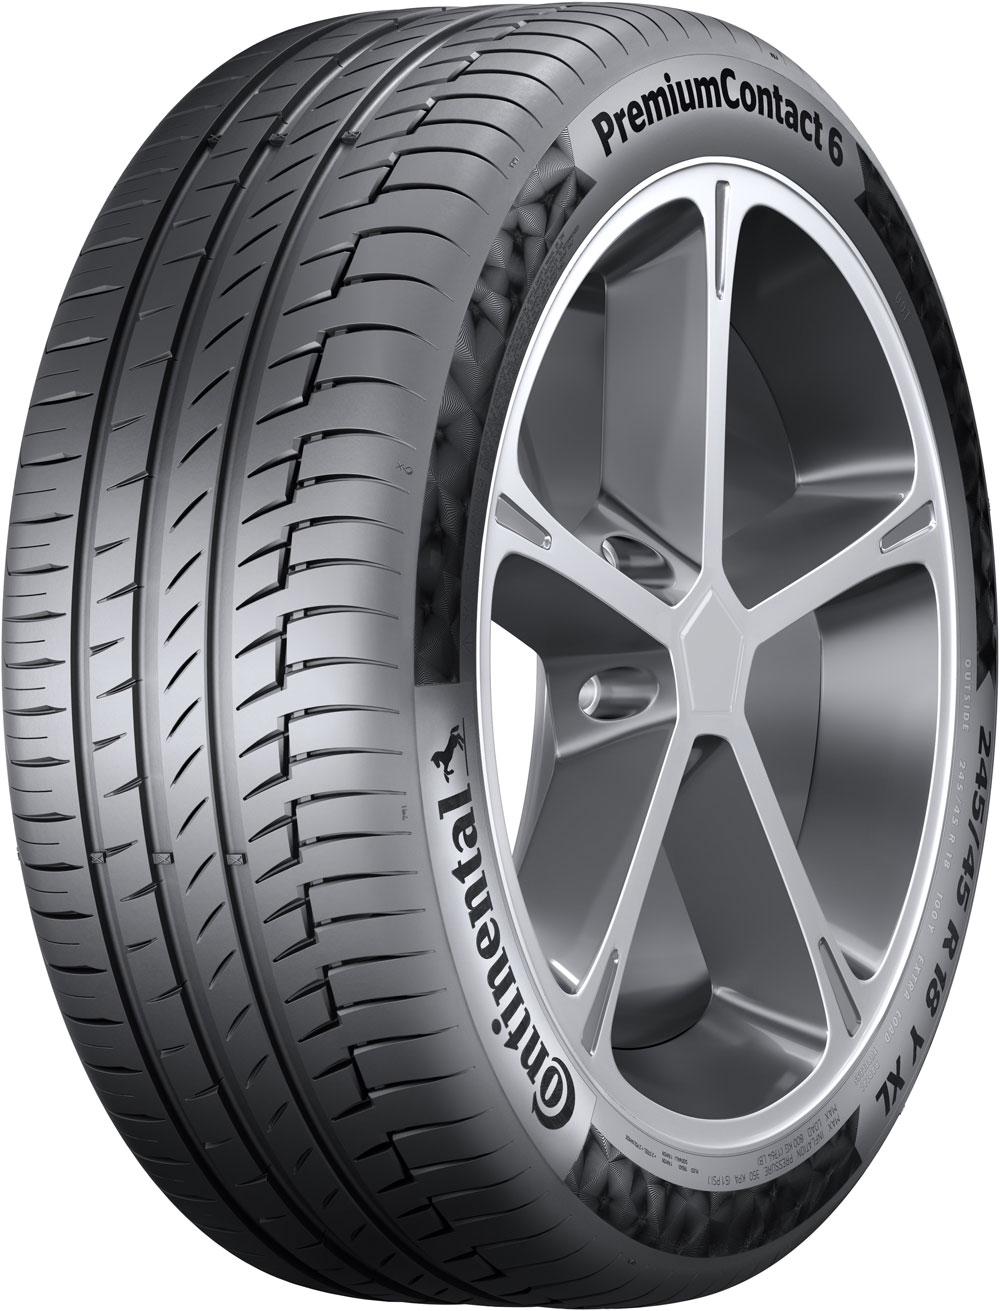 Anvelope jeep CONTINENTAL PREMIUM 6 MO MERCEDES FP 275/55 R19 111W